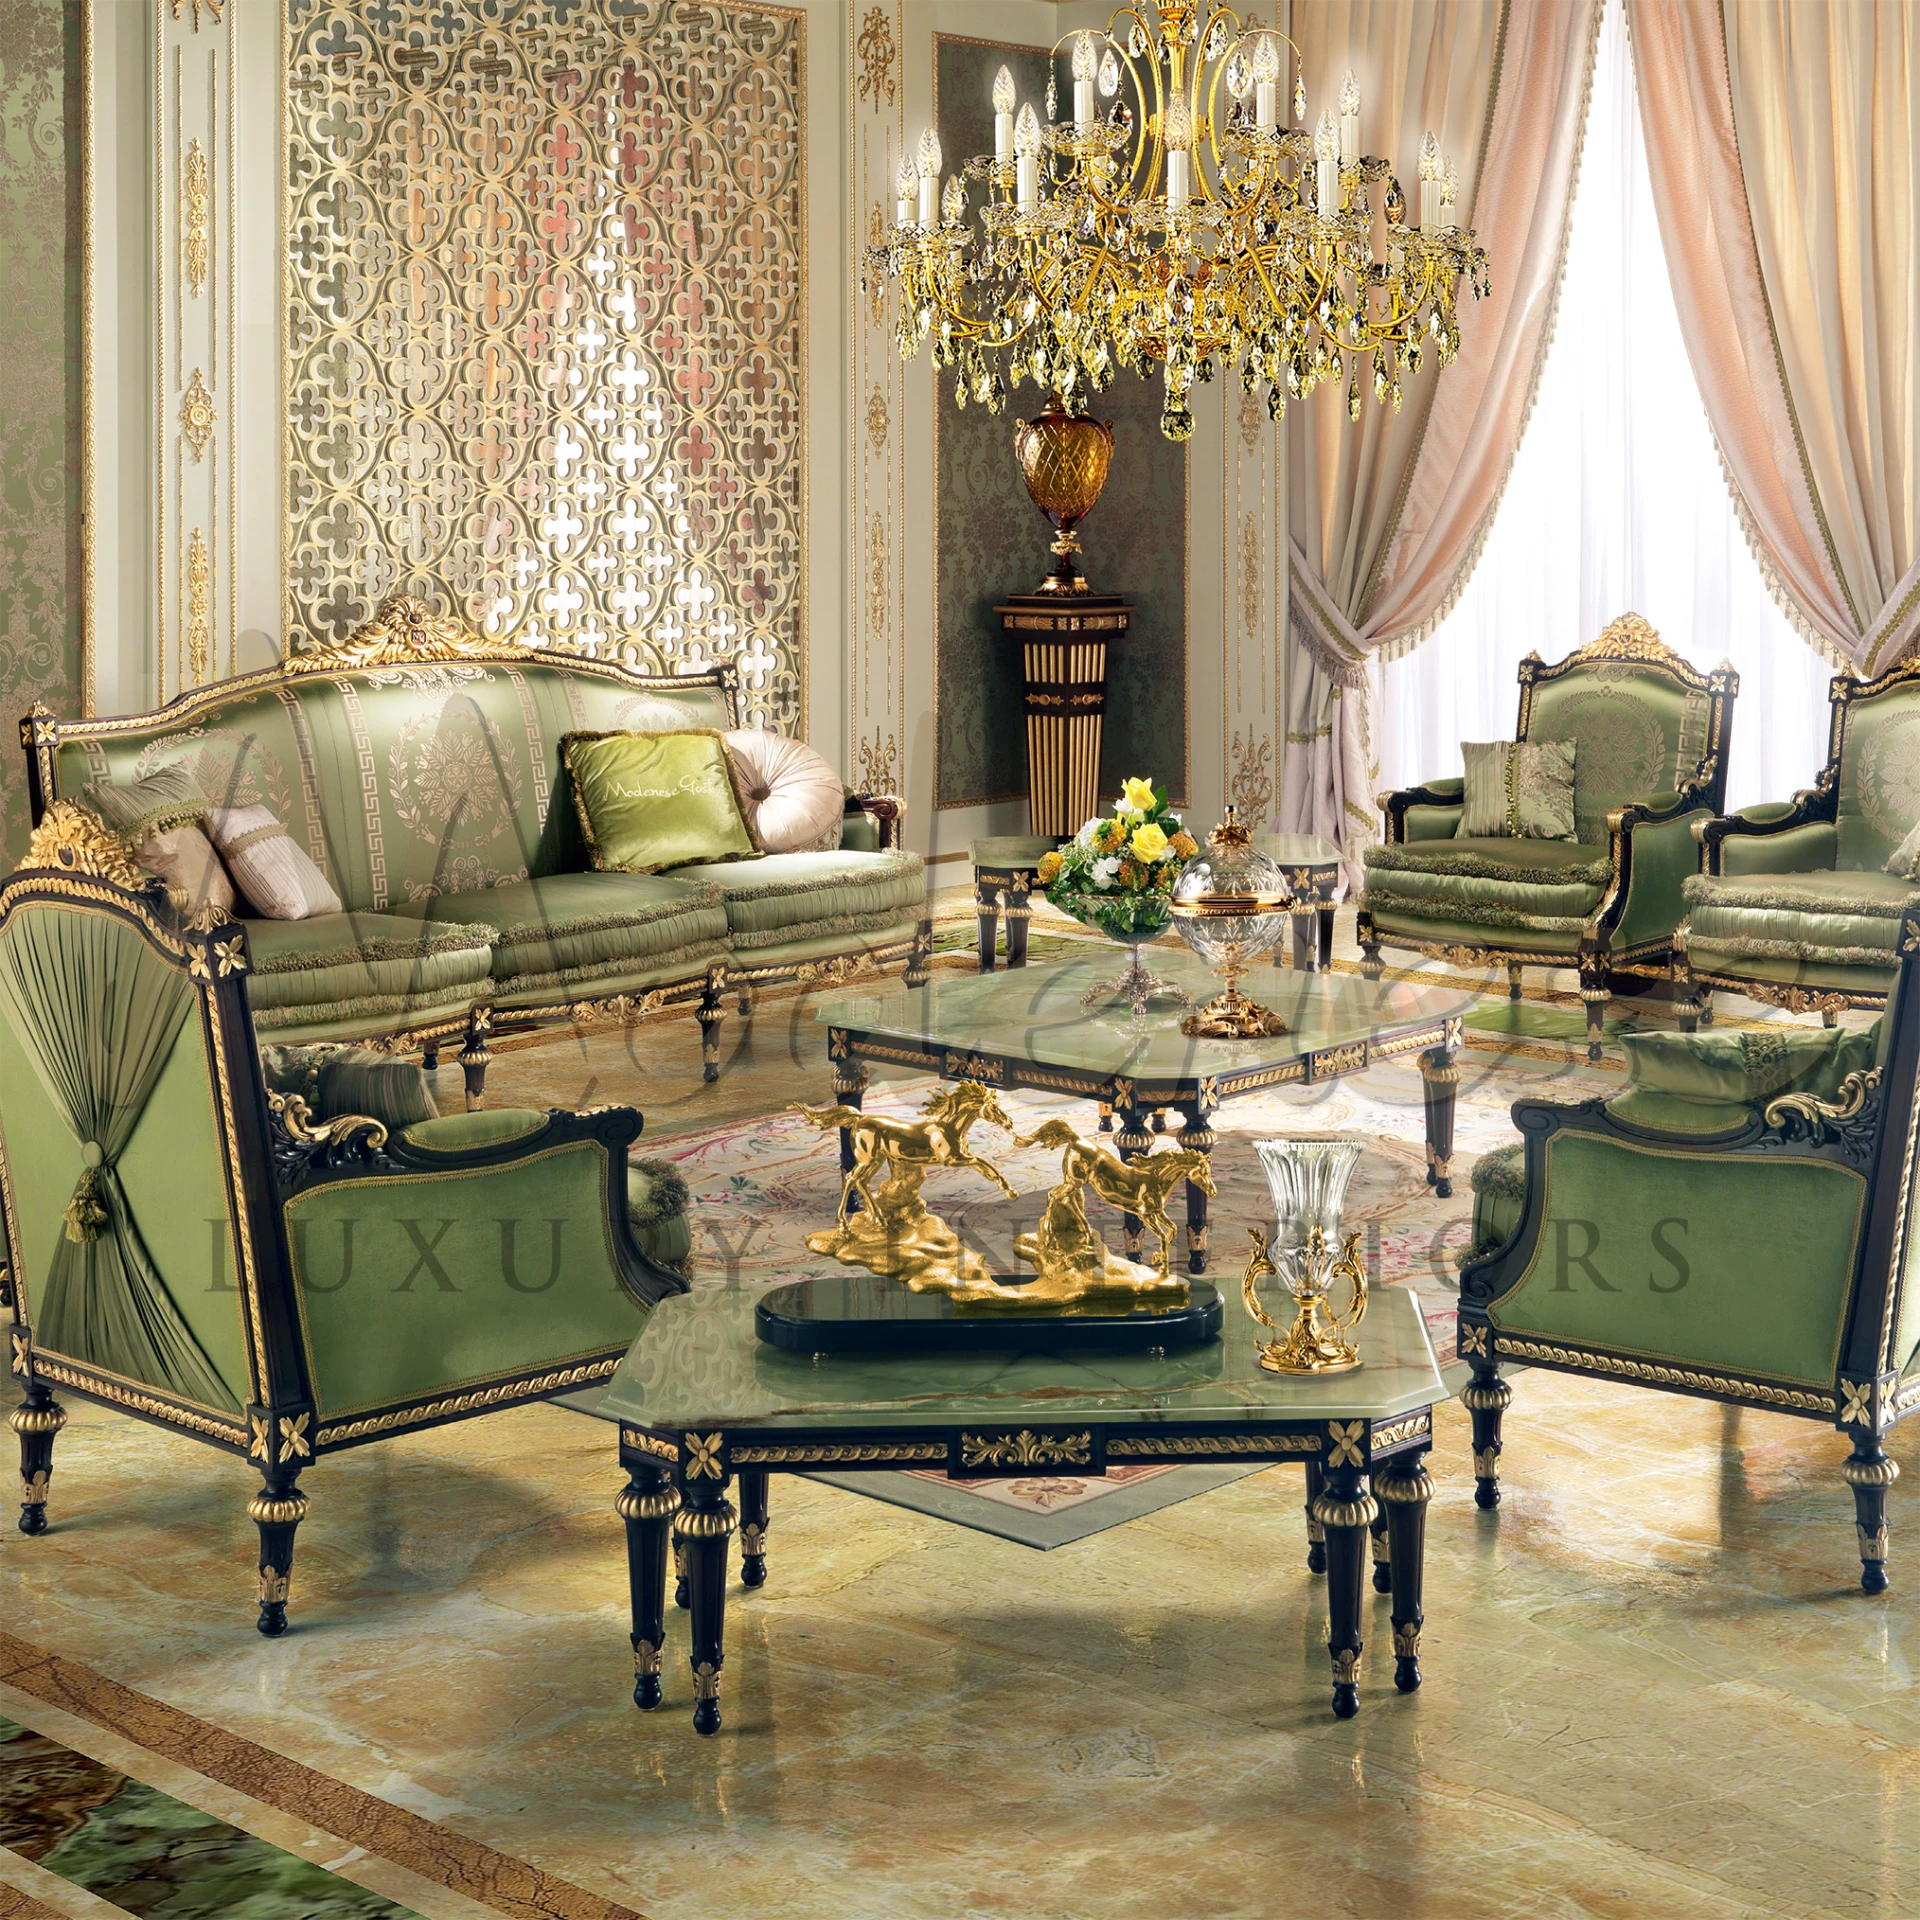 Royal Green Pillow: A masterpiece of luxury, adorned with exquisite trims and crafted with Italian elegance and quality.